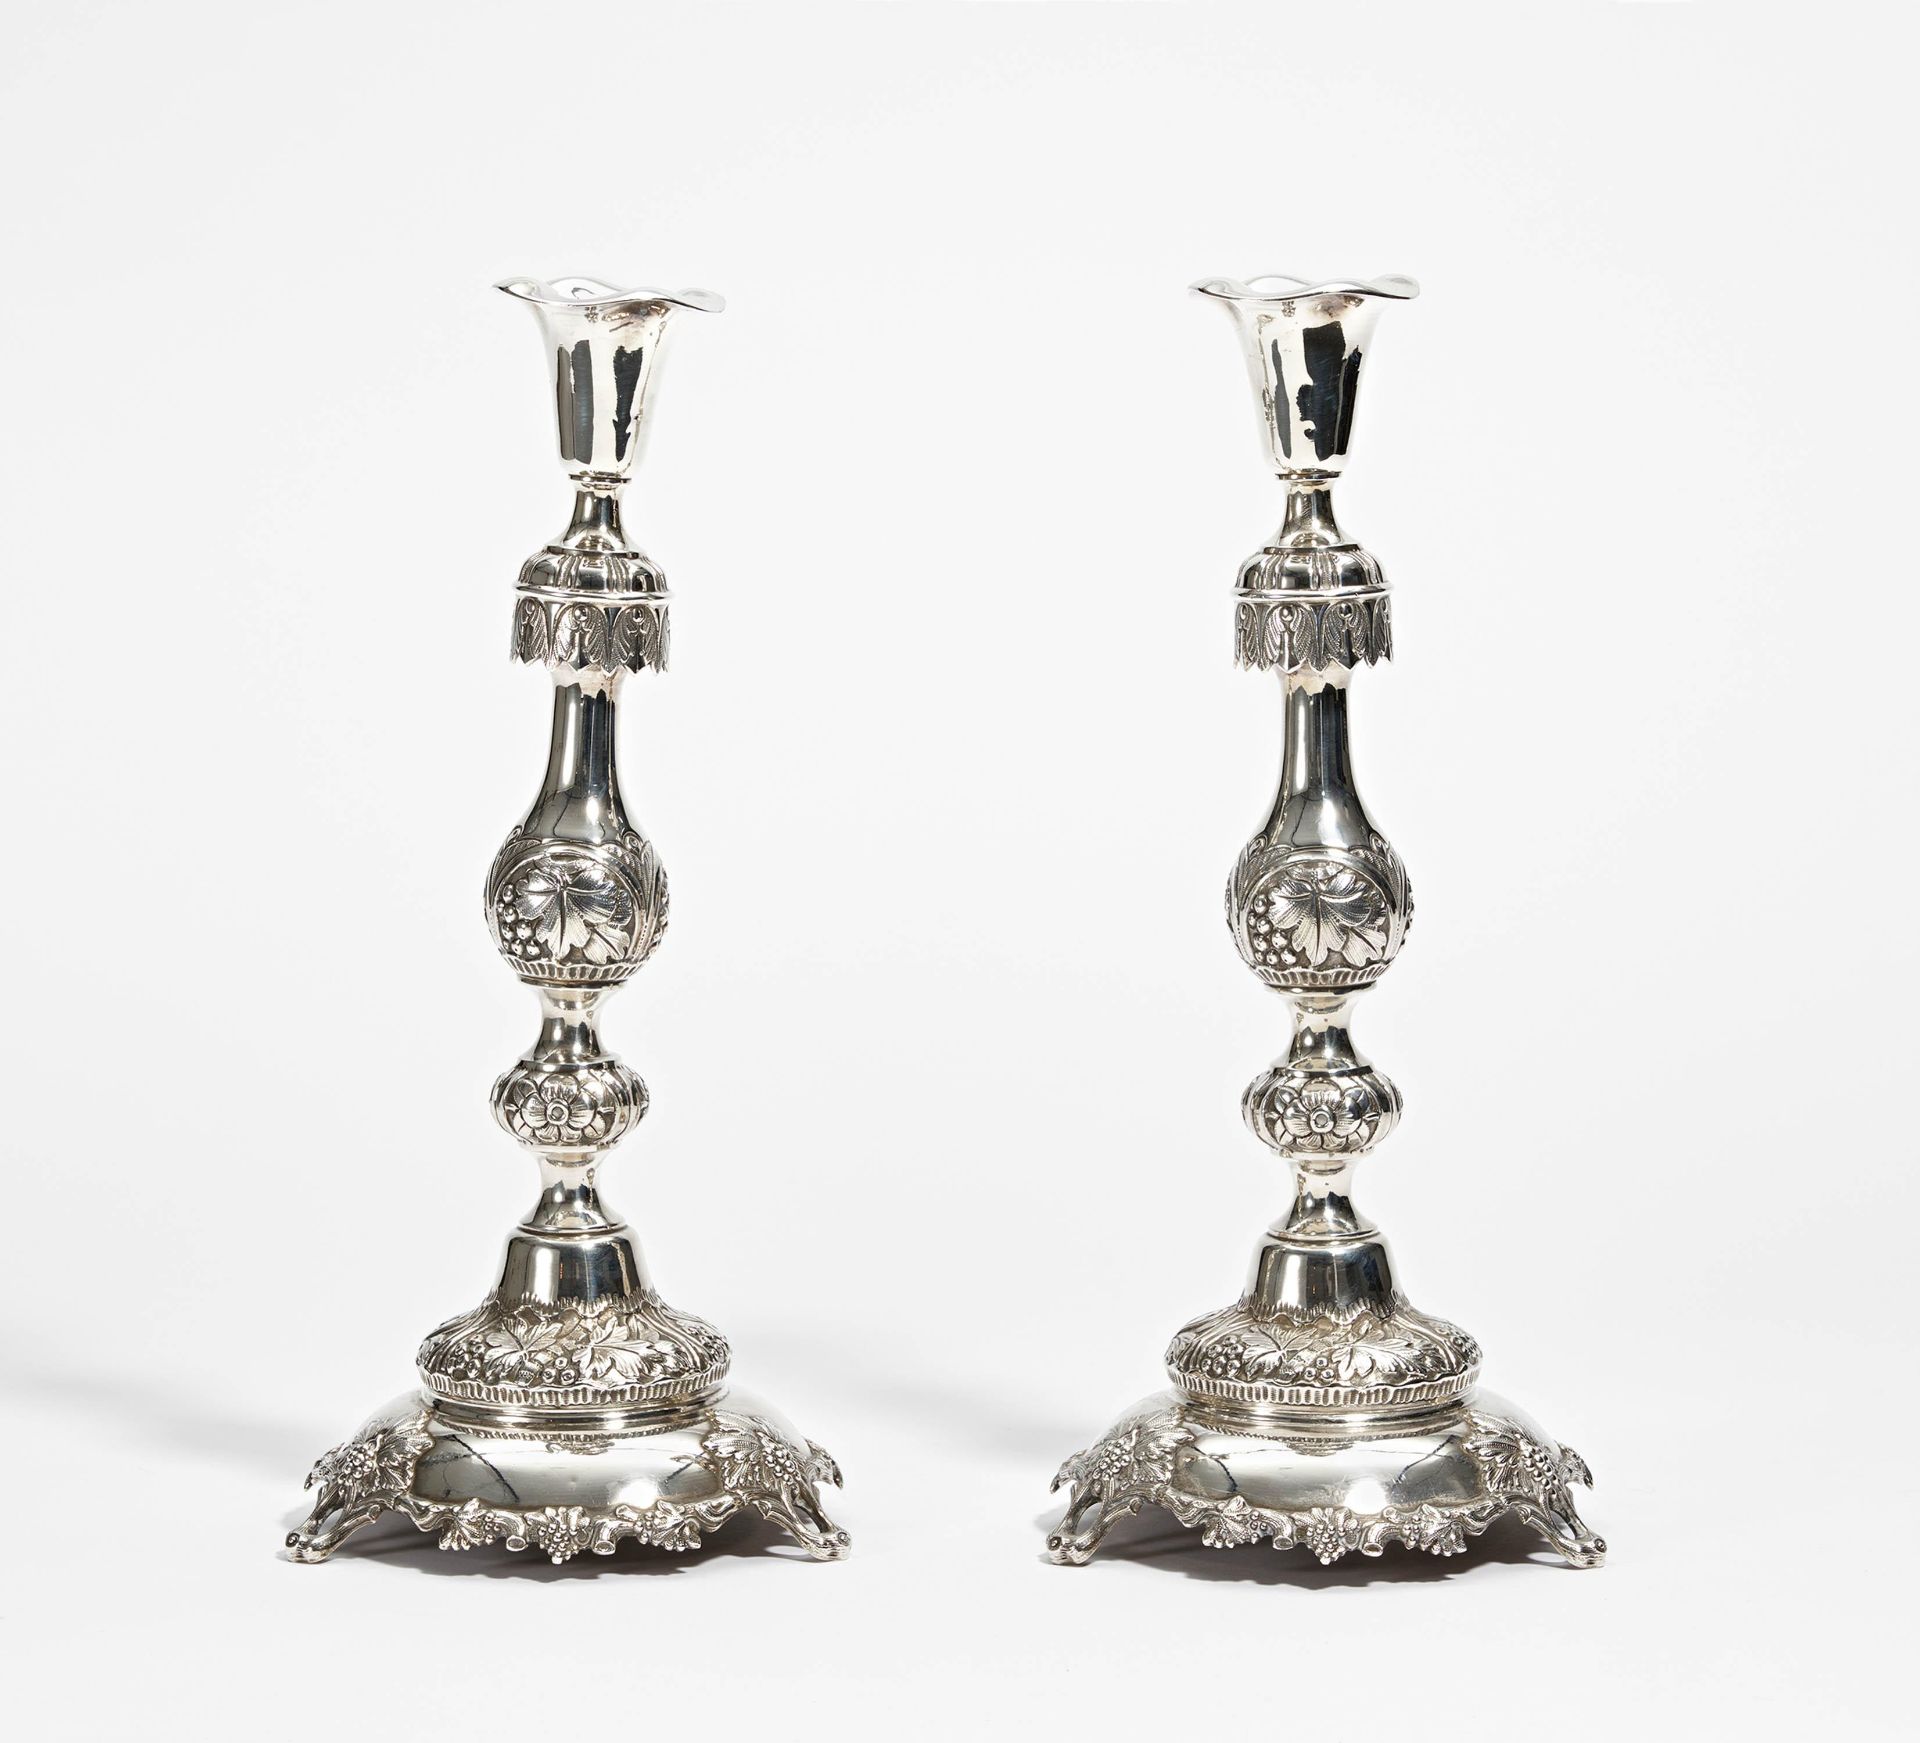 Pair of candlesticks with grape and vine décor